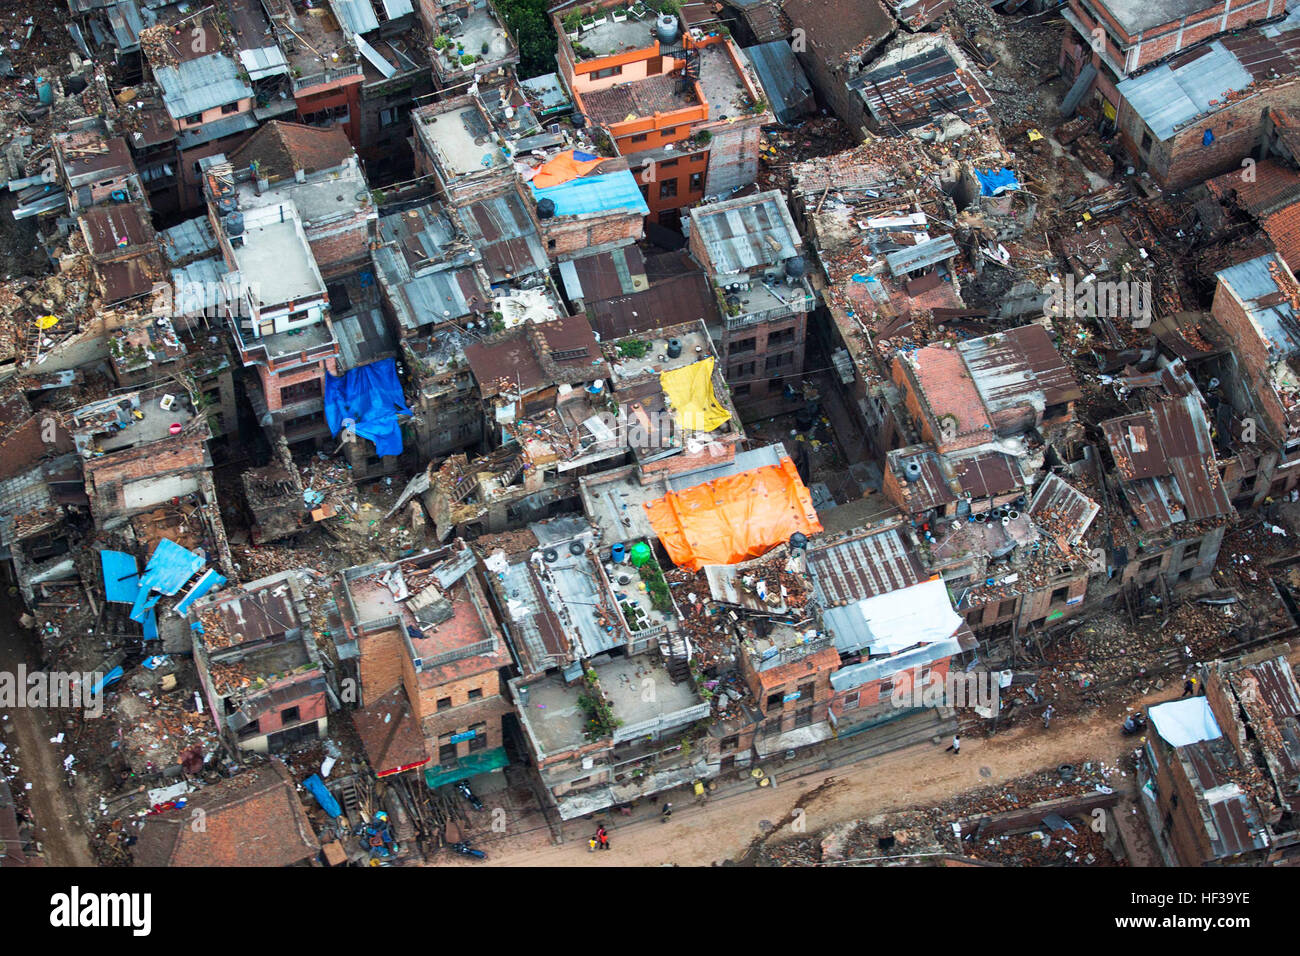 Aerial imagery, taken during a joint mission between soldiers with the Nepalese army and the Joint Task Force 505 delivering aid and relief supplies, shows areas affected by an earthquake in the Sindhuli District, Nepal, May, 10, during OPERATION SAHAYOGI HAAT. The Nepalese Government requested the U.S. Government’s assistance after a 7.8 magnitude earthquake struck the country, April 25. The U.S. government ordered JTF 505 to provide unique capabilities to assist Nepal. (U.S. Marine Corps photo by MCIPAC Combat Camera Staff Sgt. Jeffrey D. Anderson/Released) Hires 150508-M-WN441-131A An aeria Stock Photo